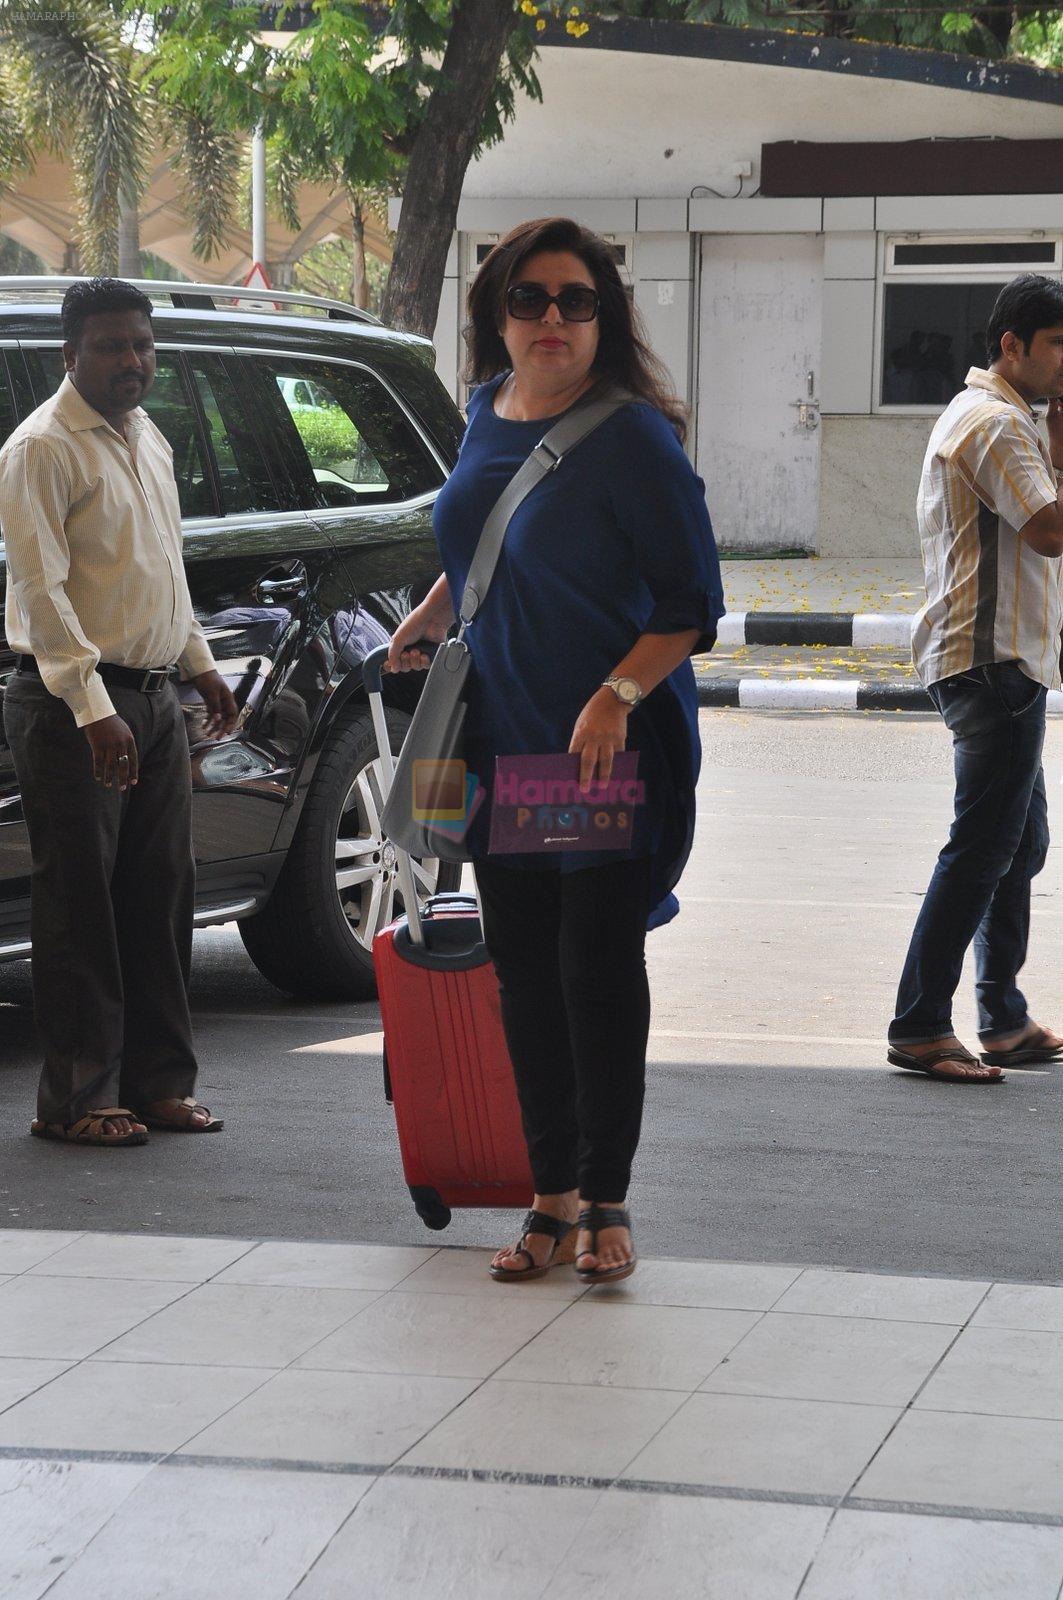 Farah Khan depart to Goa for Planet Hollywood Launch in Mumbai Airport on 14th April 2015